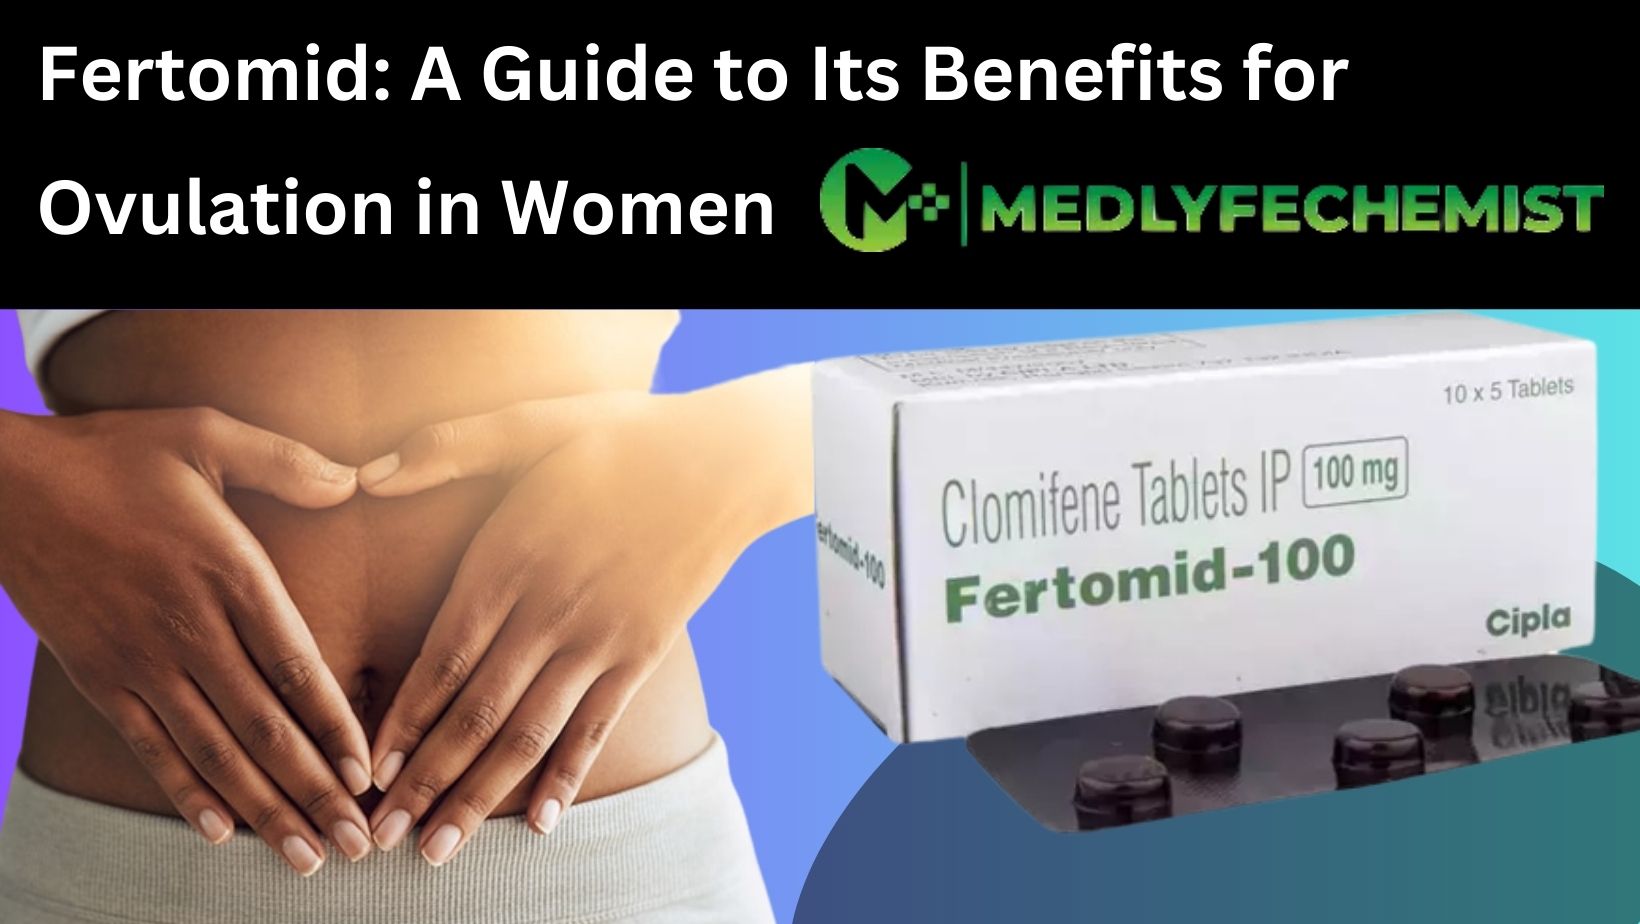 What is Fertomid Tablet ? and how it's useful for ovulation in women's